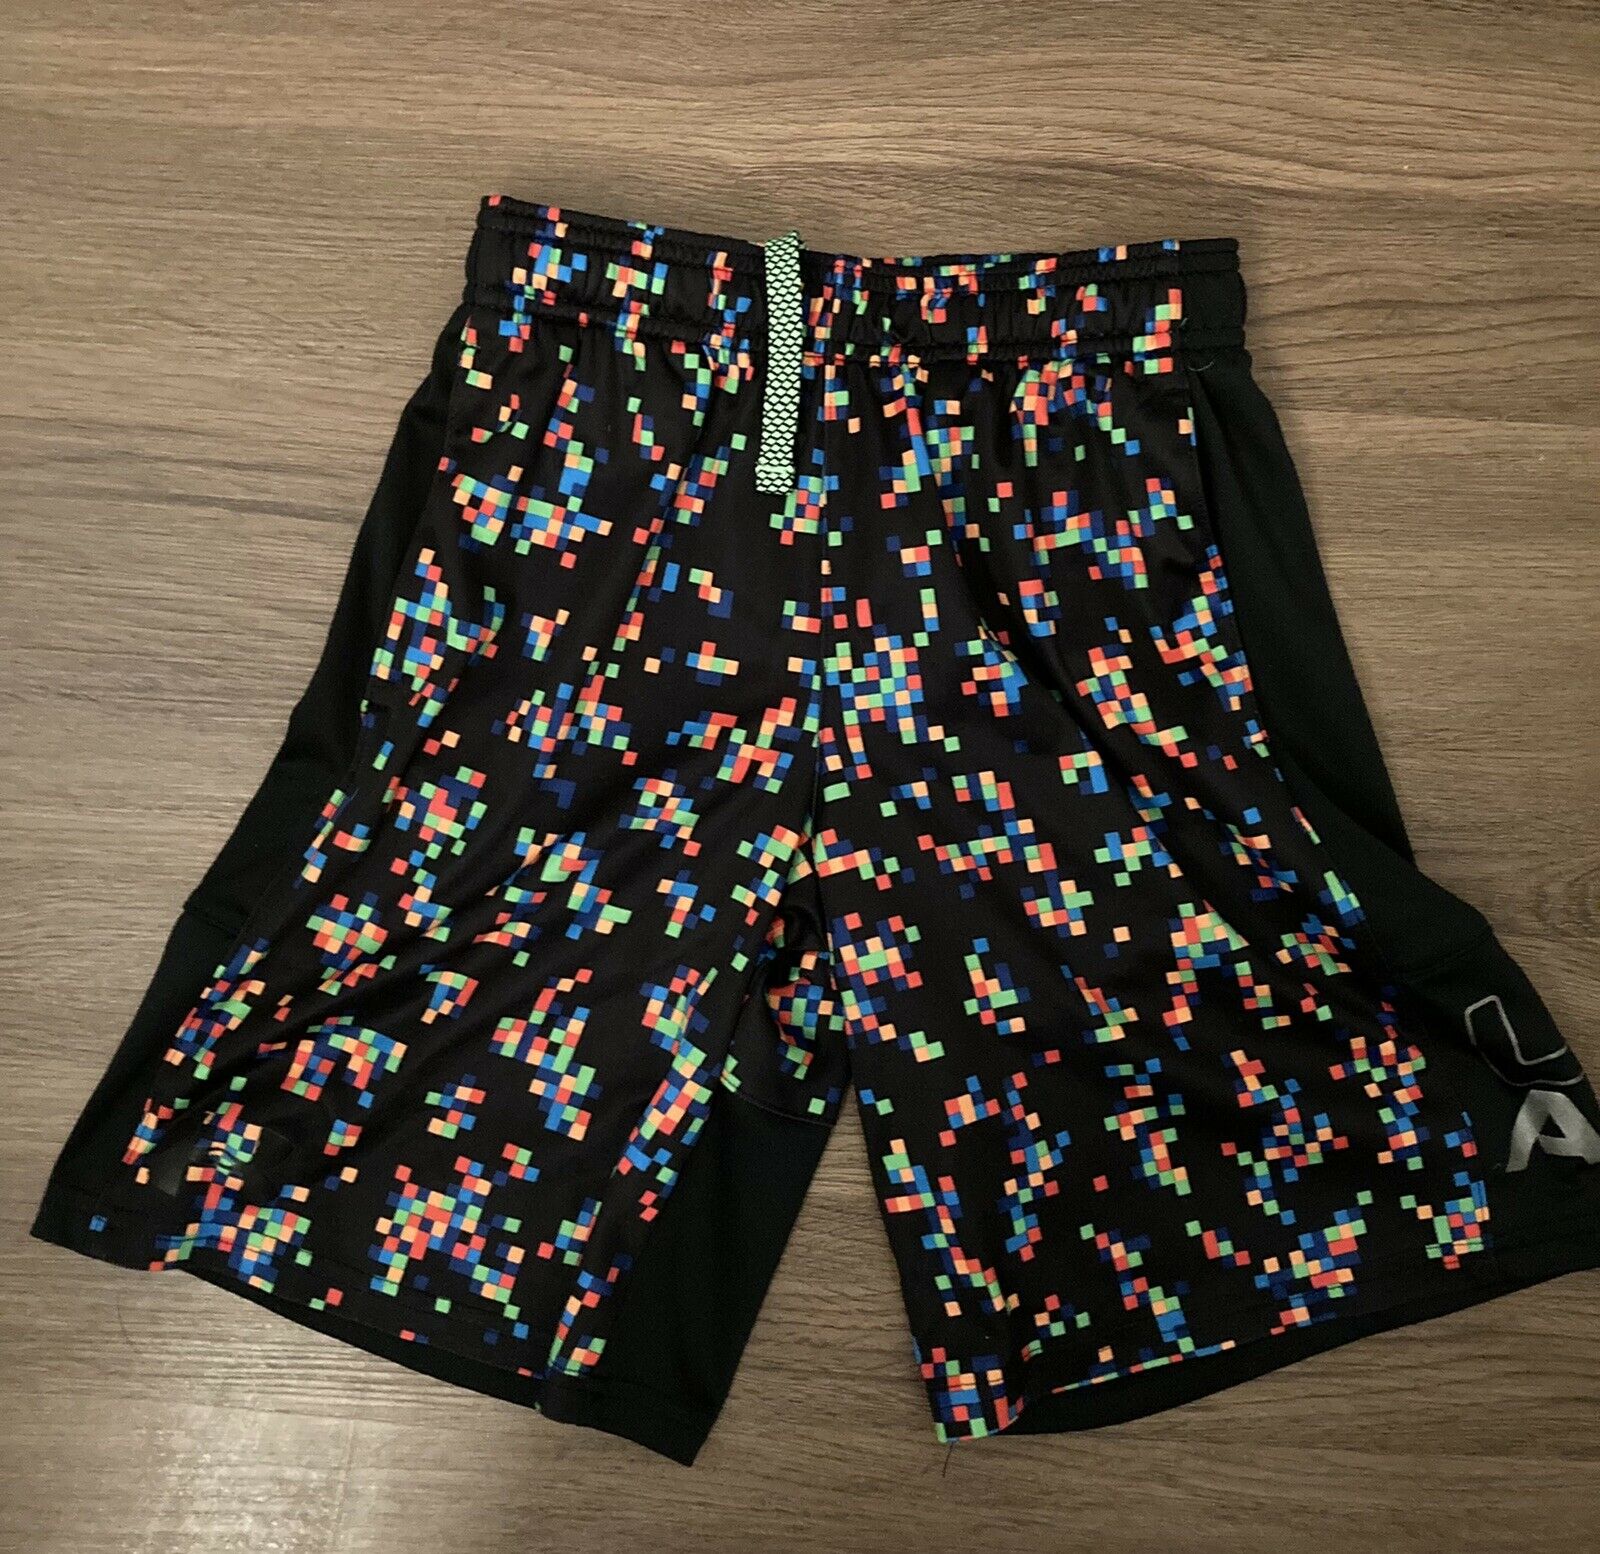 Boys Under Armour Stunt Shorts Youth Small Pockets Black W/ Multi Graphic Design